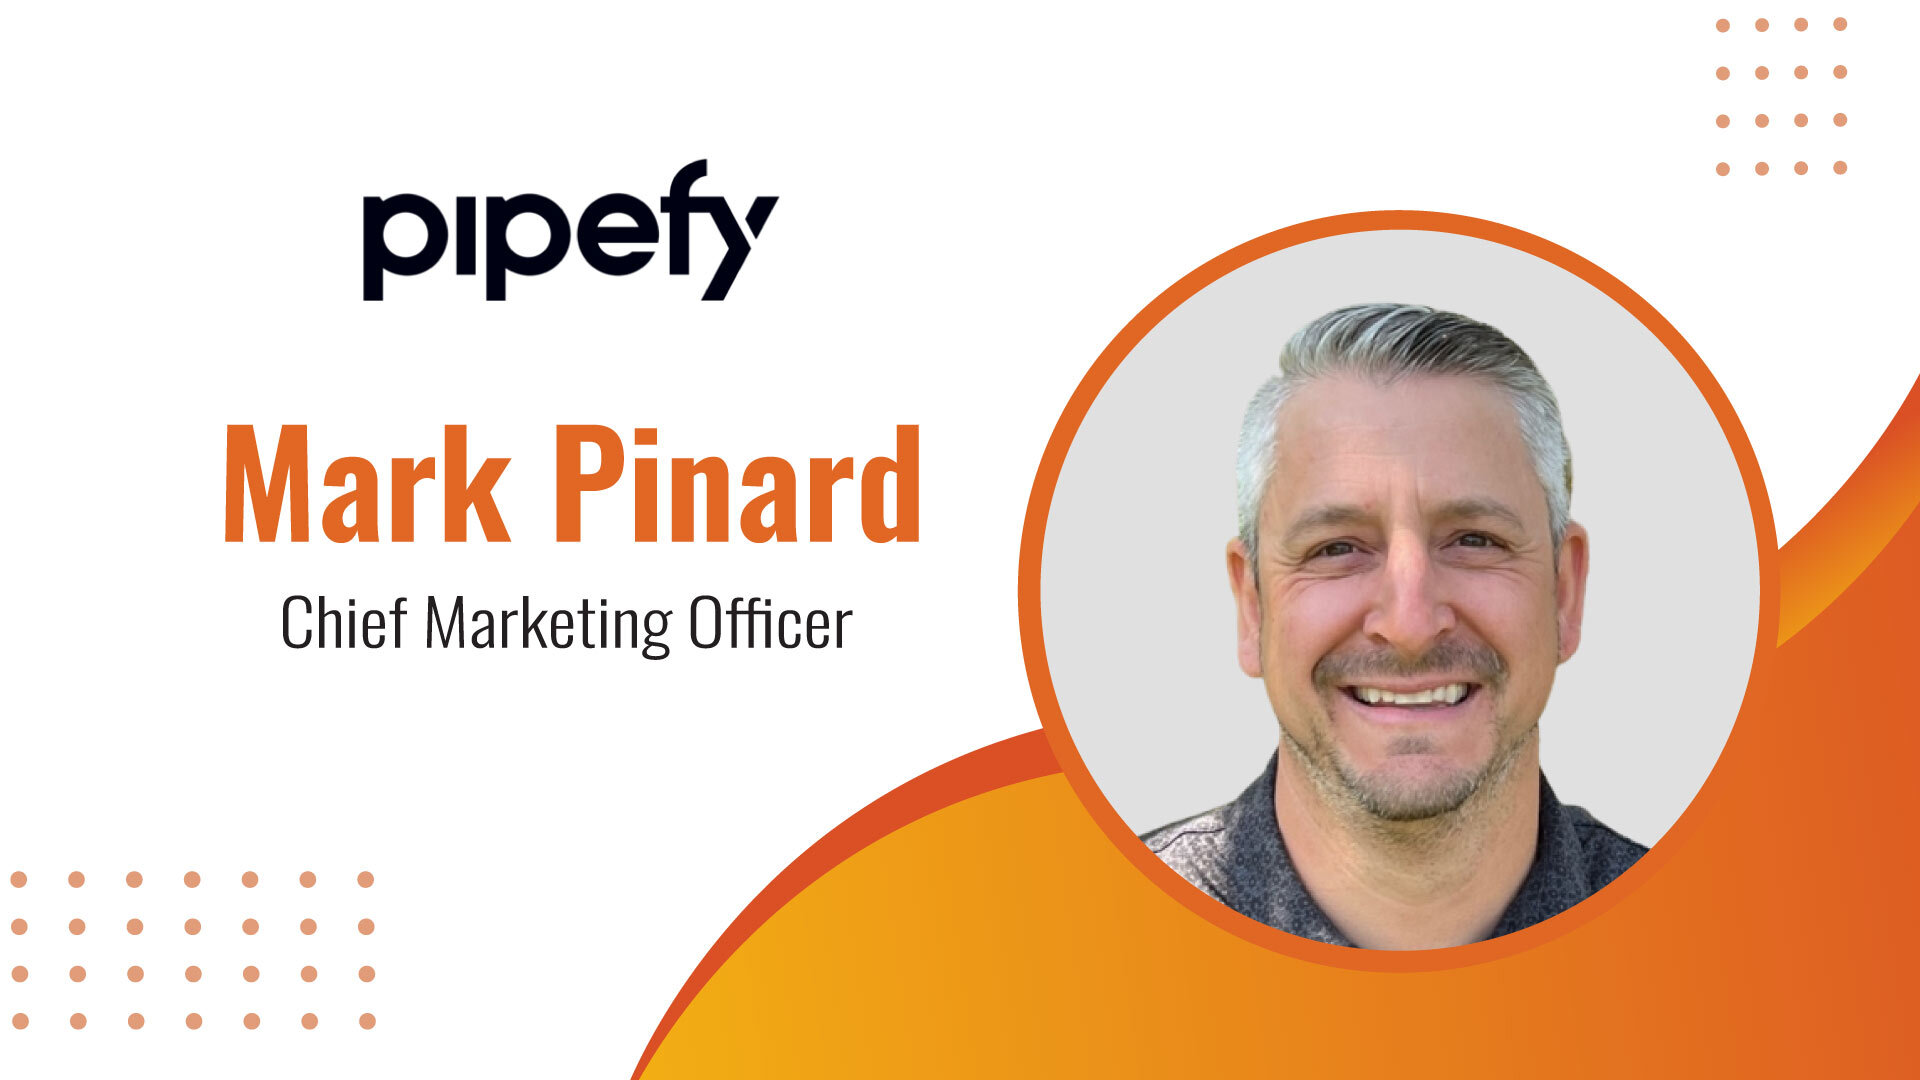 MarTech Edge Interview with Mark Pinard, Chief Marketing Officer, Pipefy